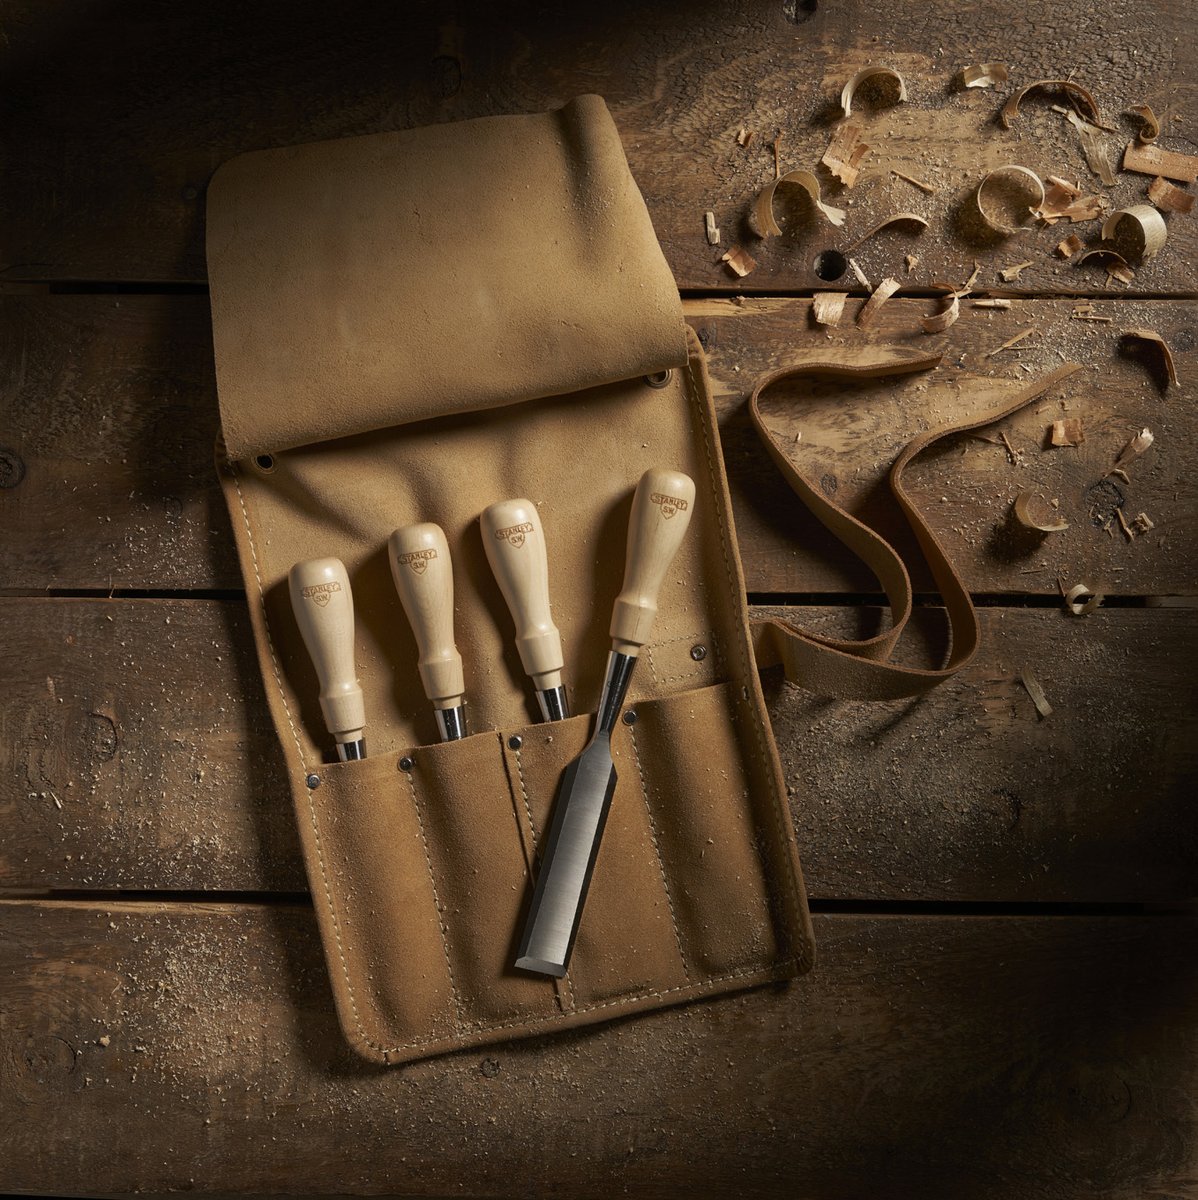 Have a go-to chisel set? Our striking SweetHeart™ Chisel Set is a #woodworkers go-to. Available at @homedepot and other Independent Retailers. bit.ly/3S6Ze3b